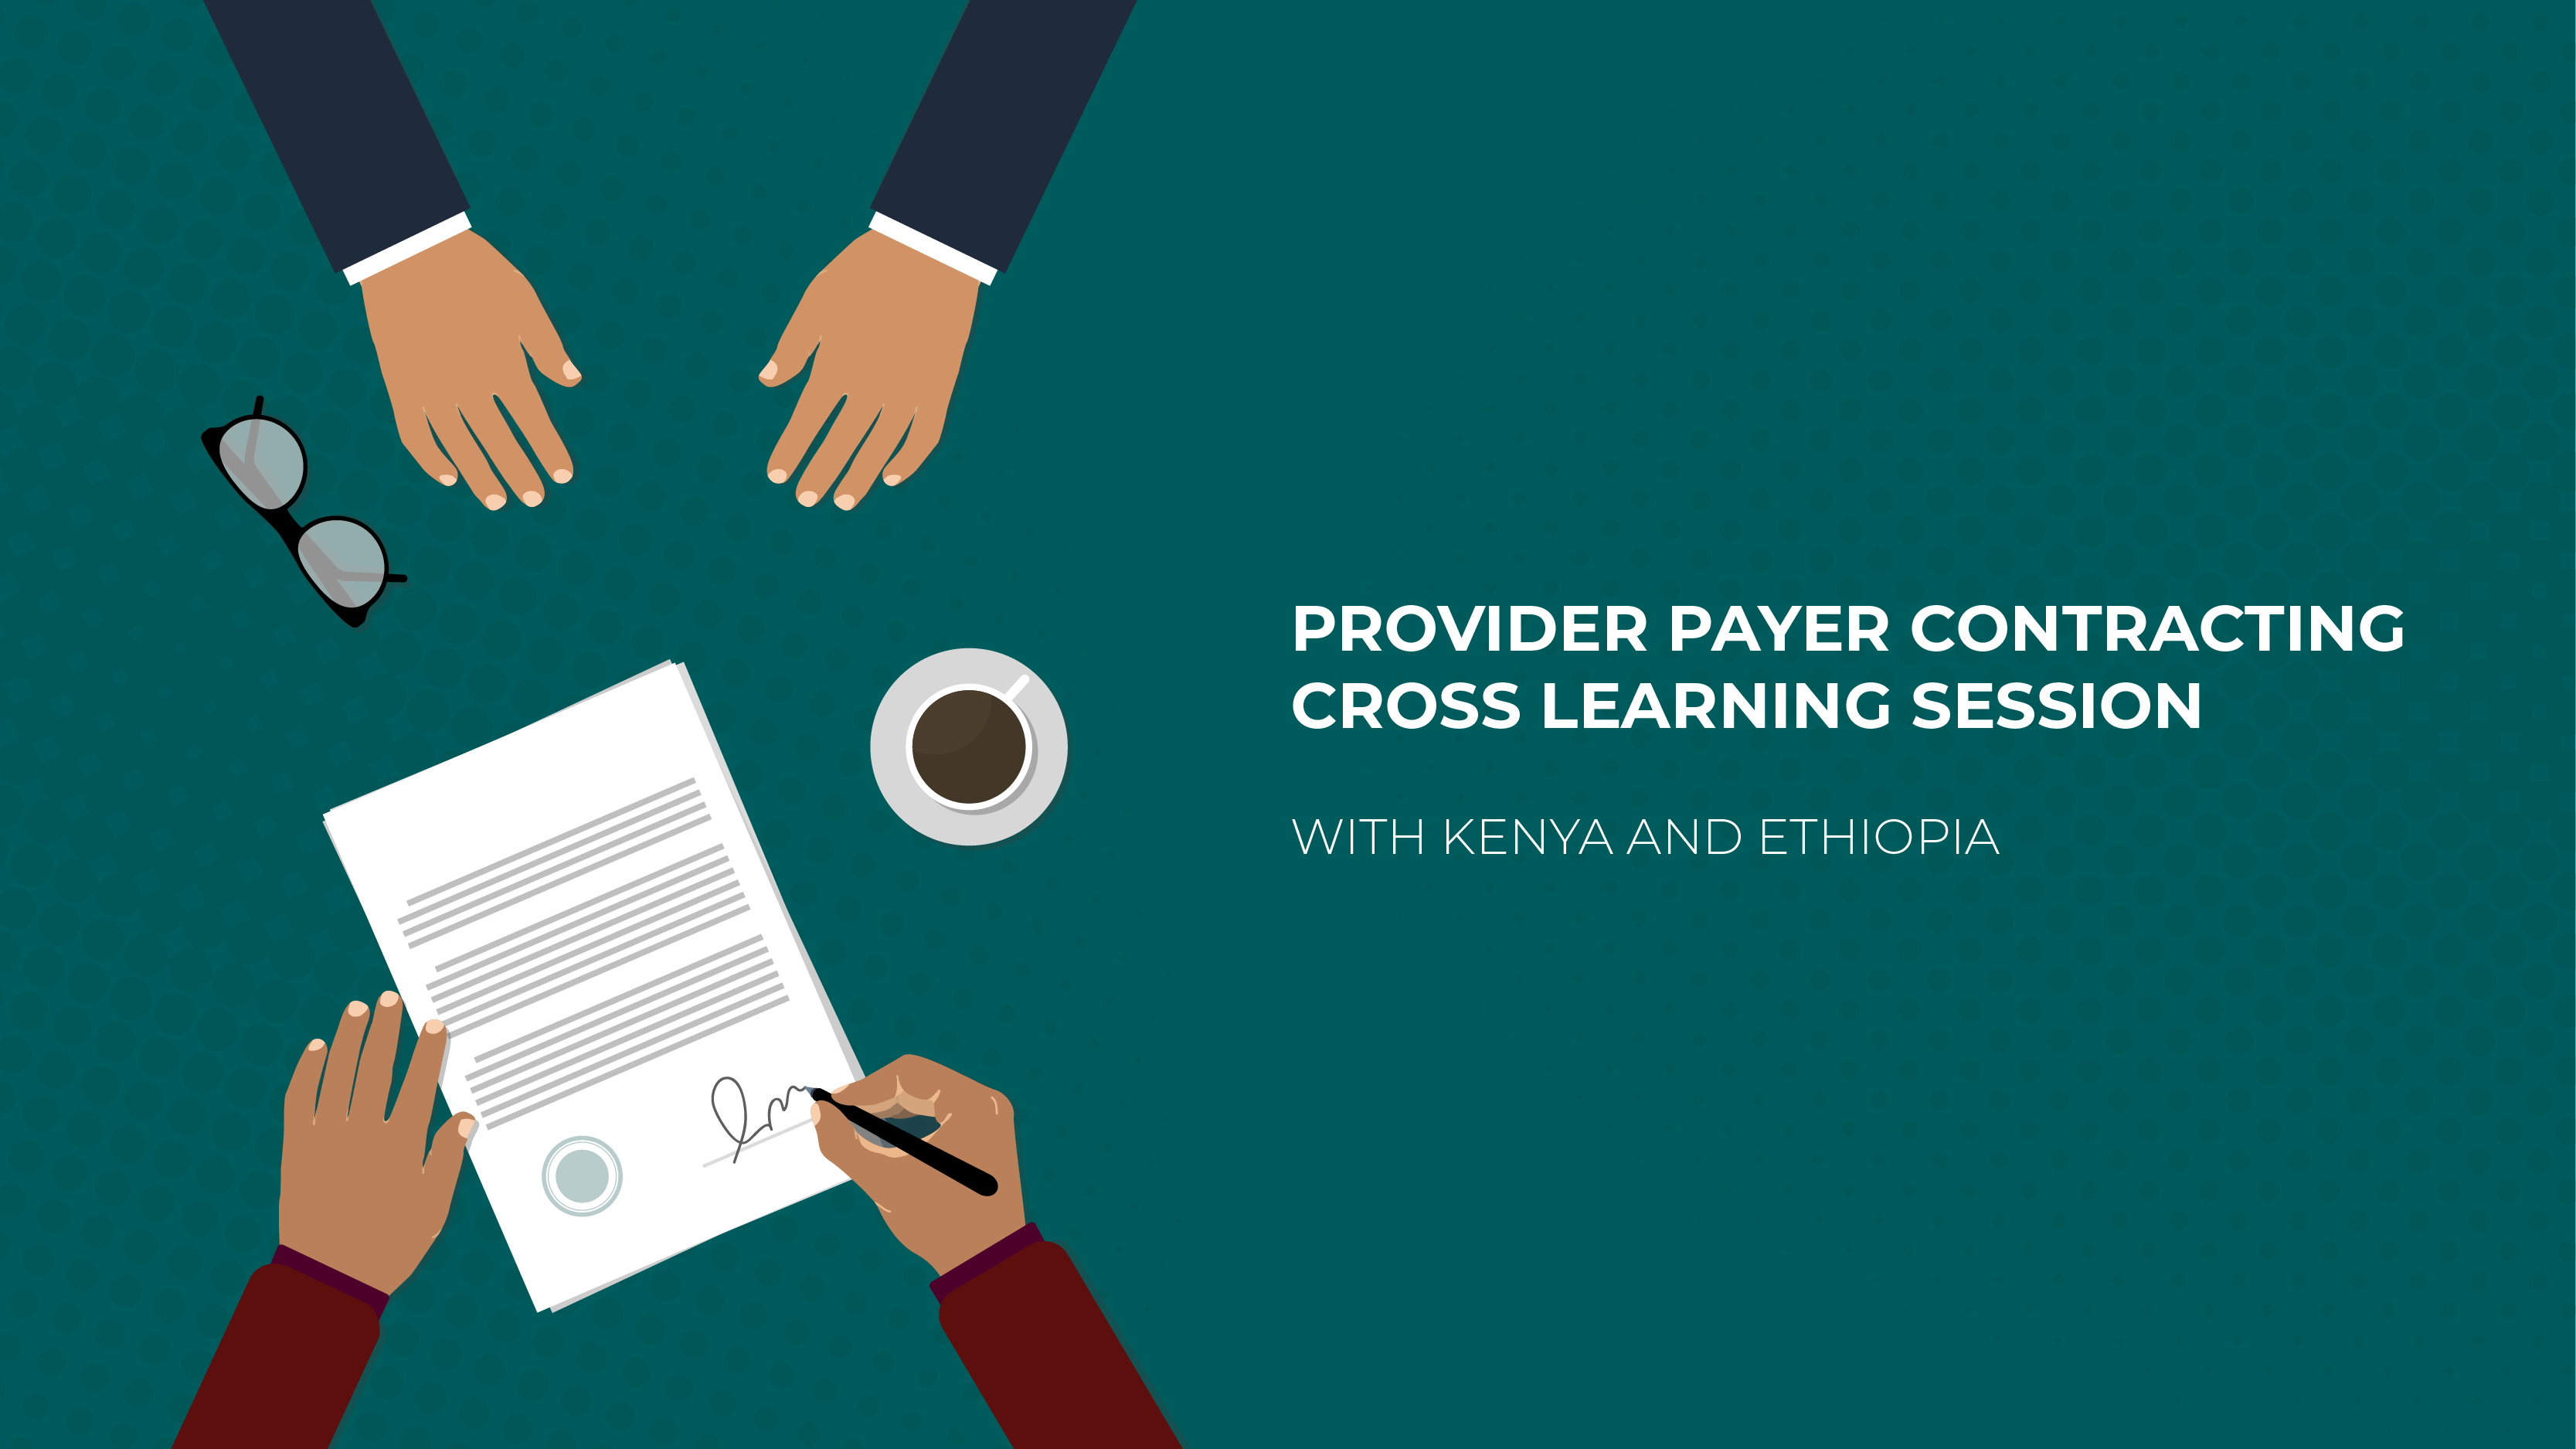 Private Provider Contracting Cross-Learning Session (Kenya & Ethiopia)